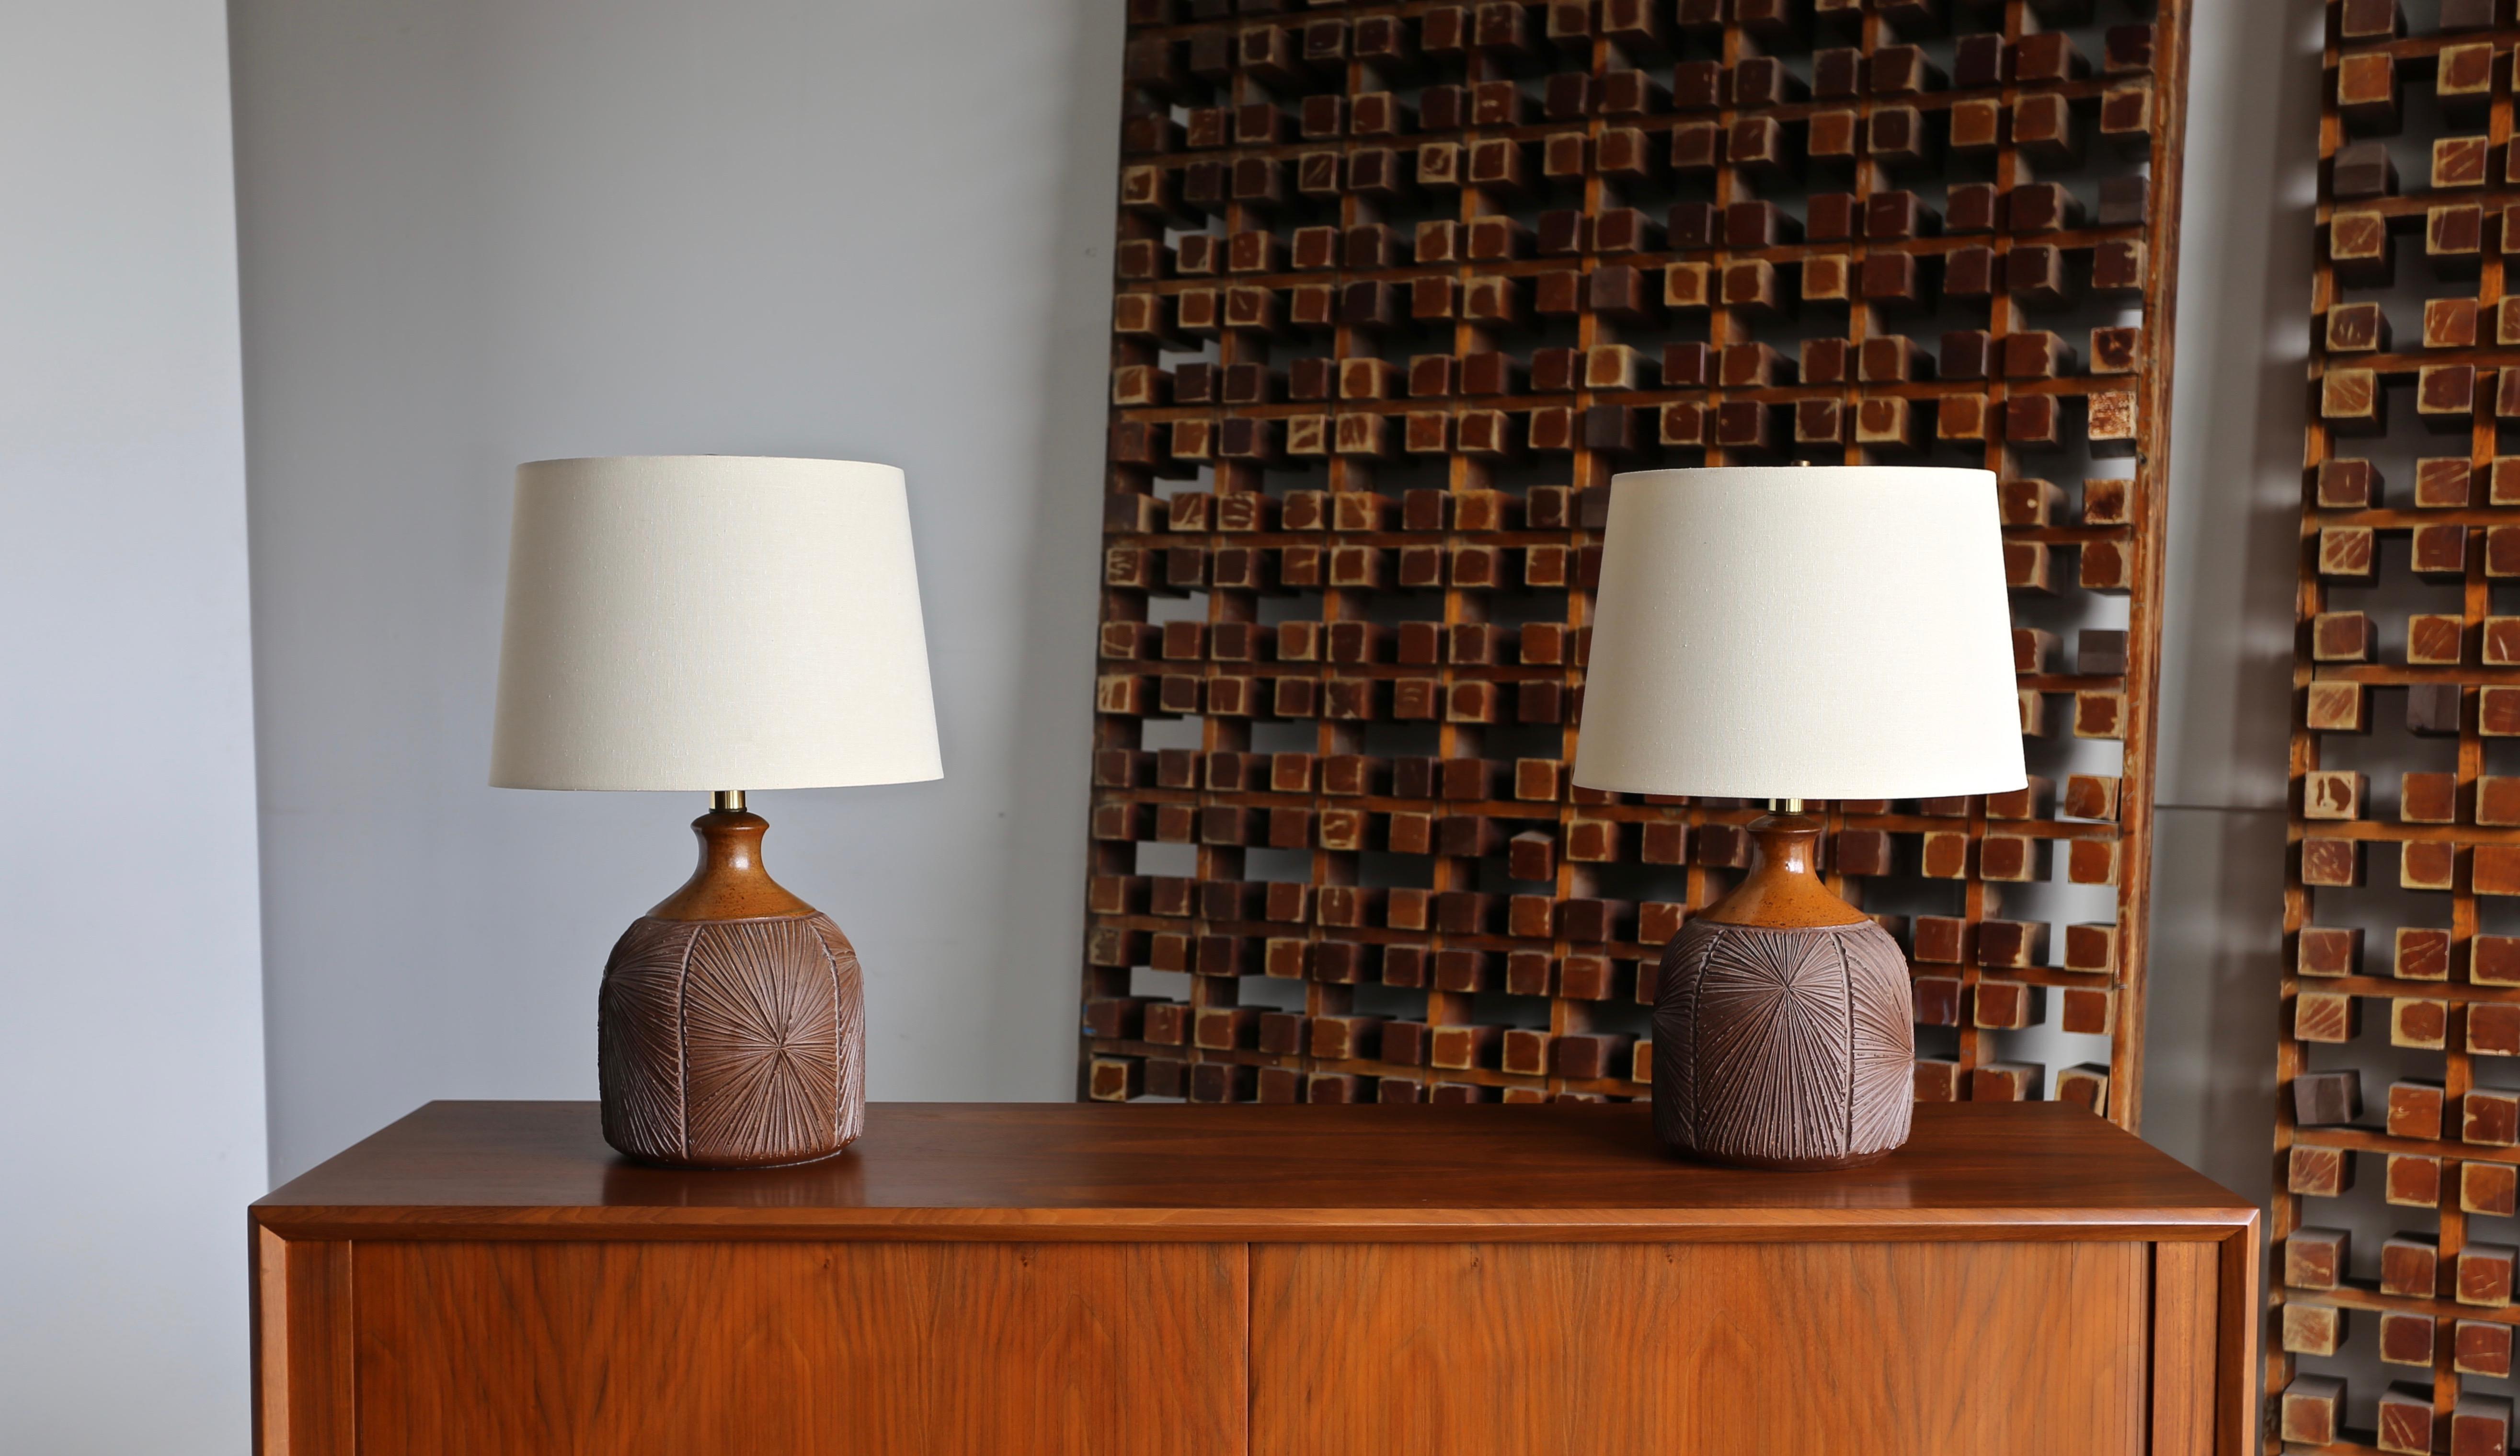 Pair of ceramic Earthgender table lamps by David Cressey Robert Maxwell, circa 1970.

The listed measurements include the shades.

This pair is a great example of California modern design.